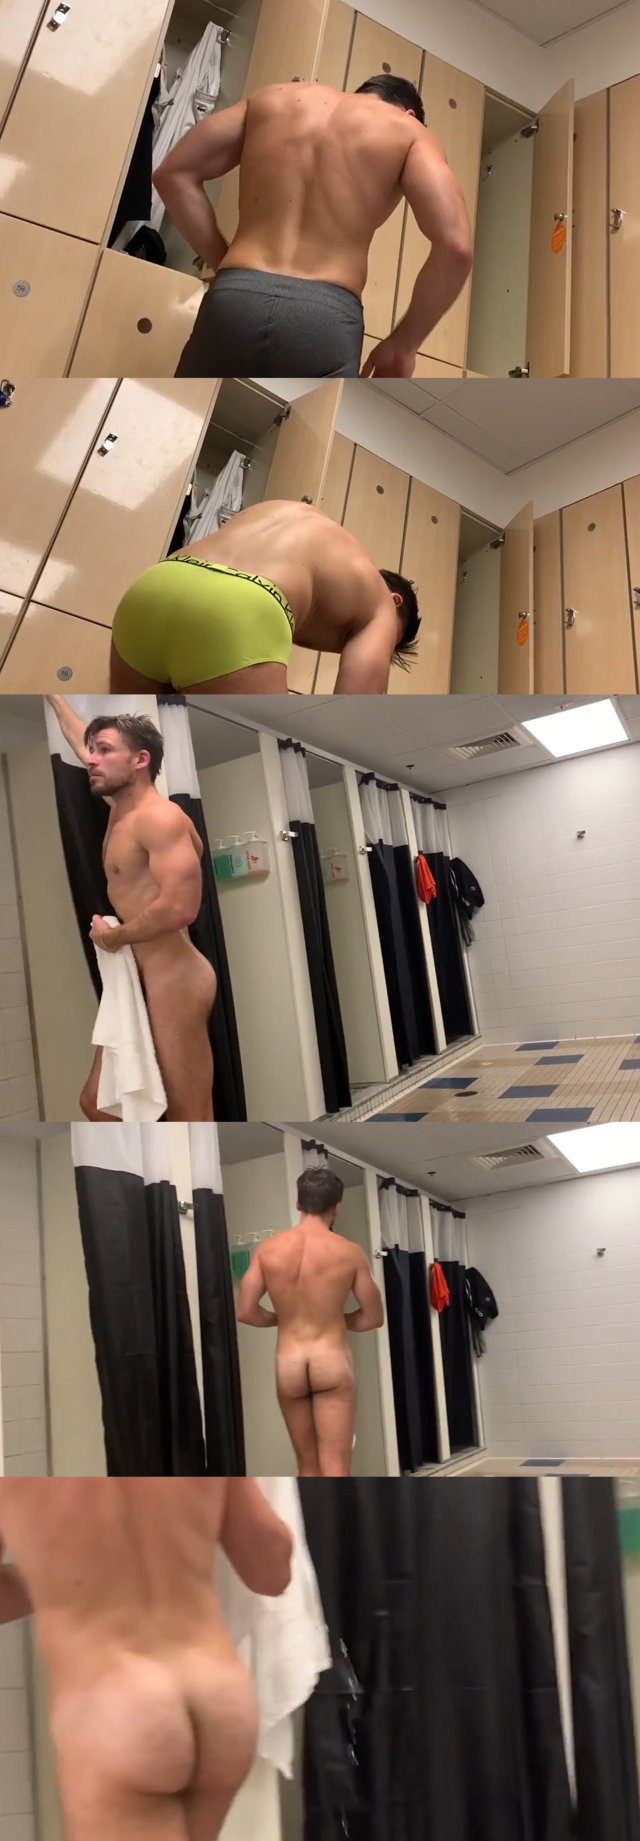 studly gym guy with hairy ass caught naked in locker room and in the shower